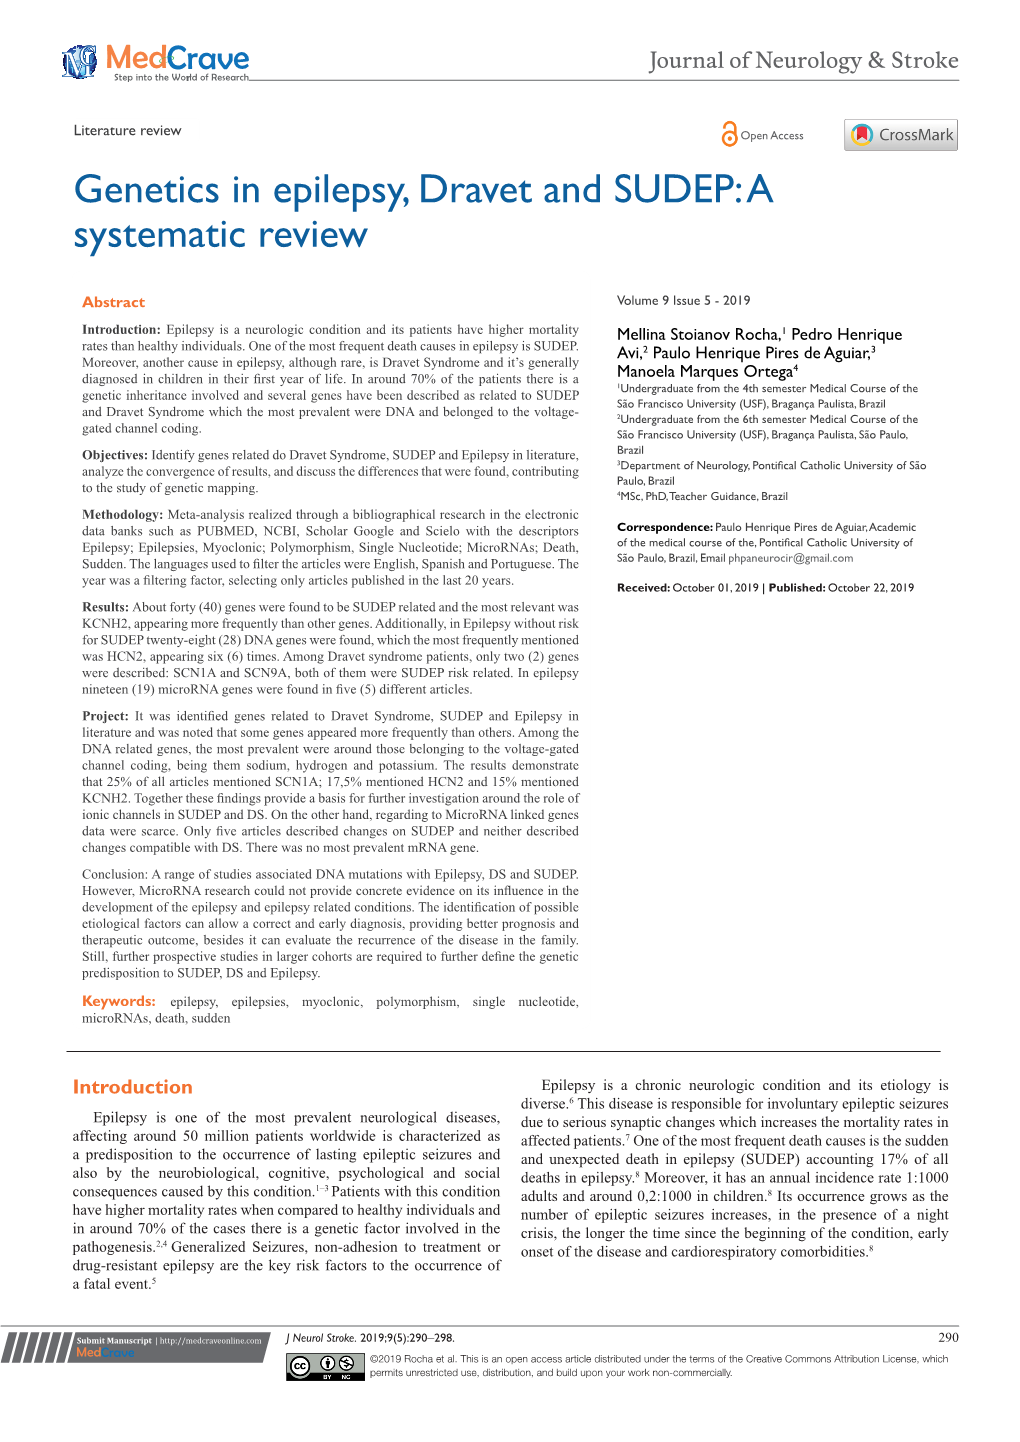 Genetics in Epilepsy, Dravet and SUDEP: a Systematic Review